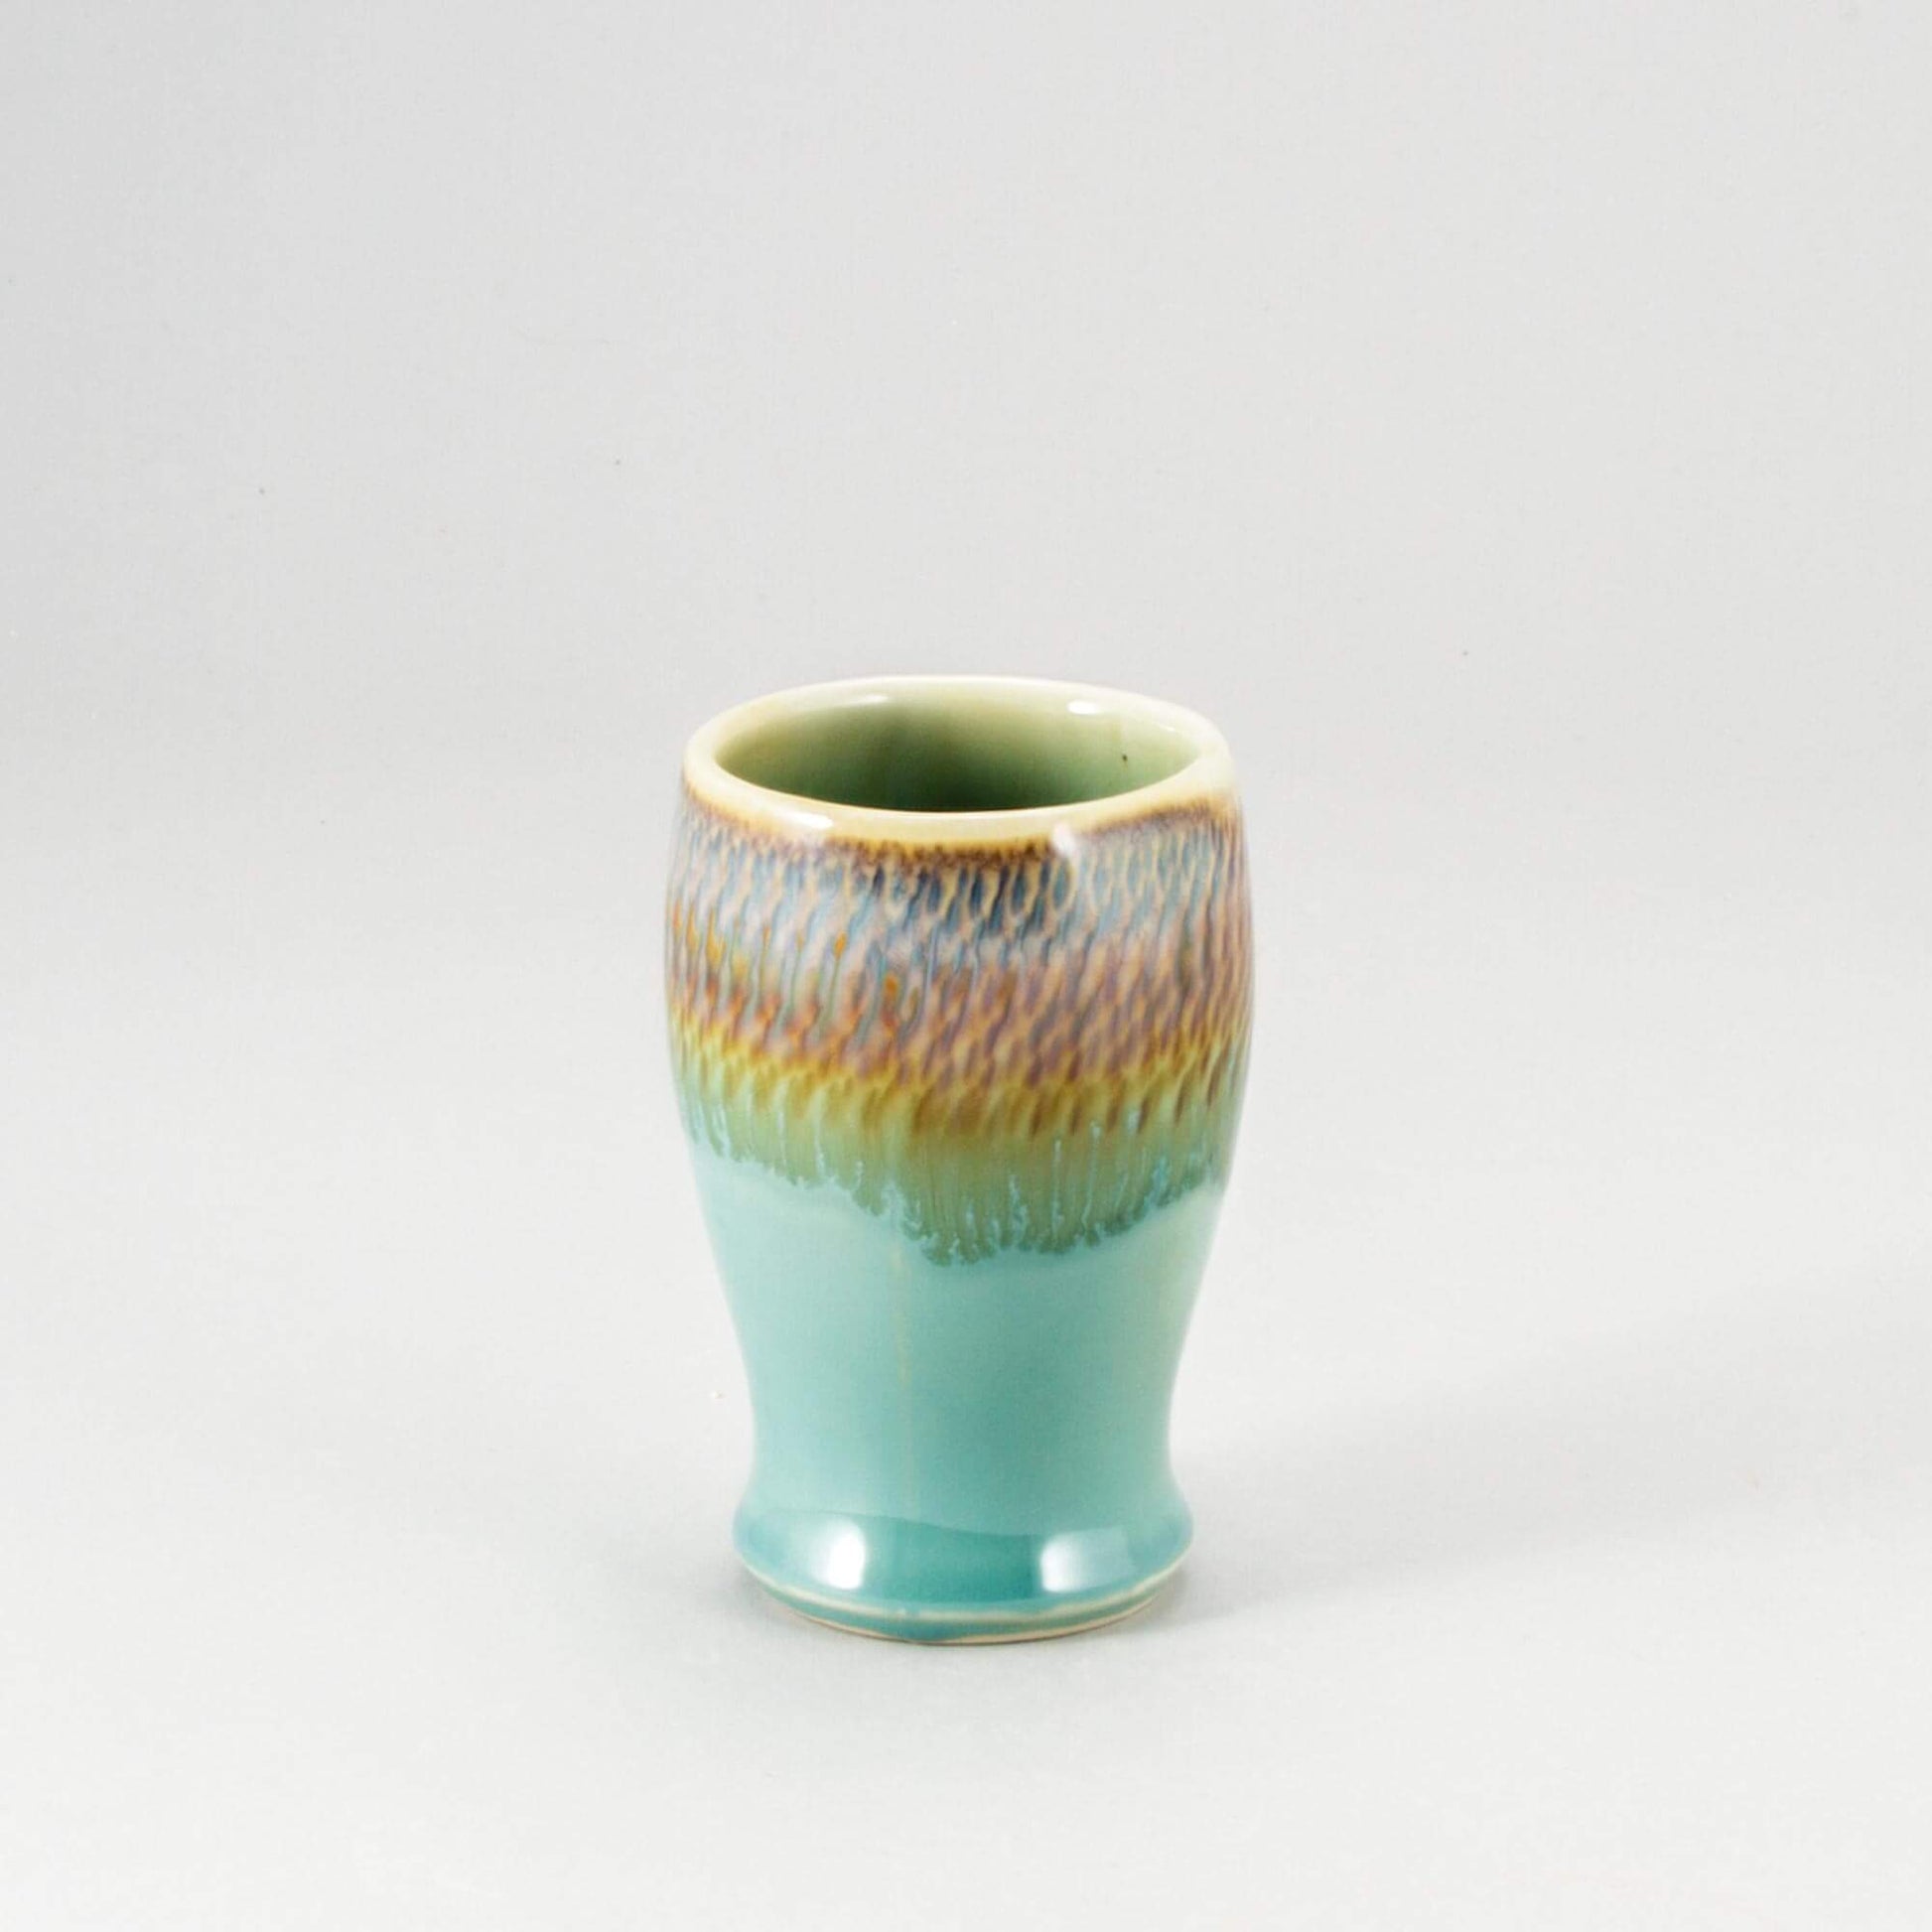 andmade Pottery Curvy Tumbler in Green Oribe pattern made by Georgetown Pottery in Maine